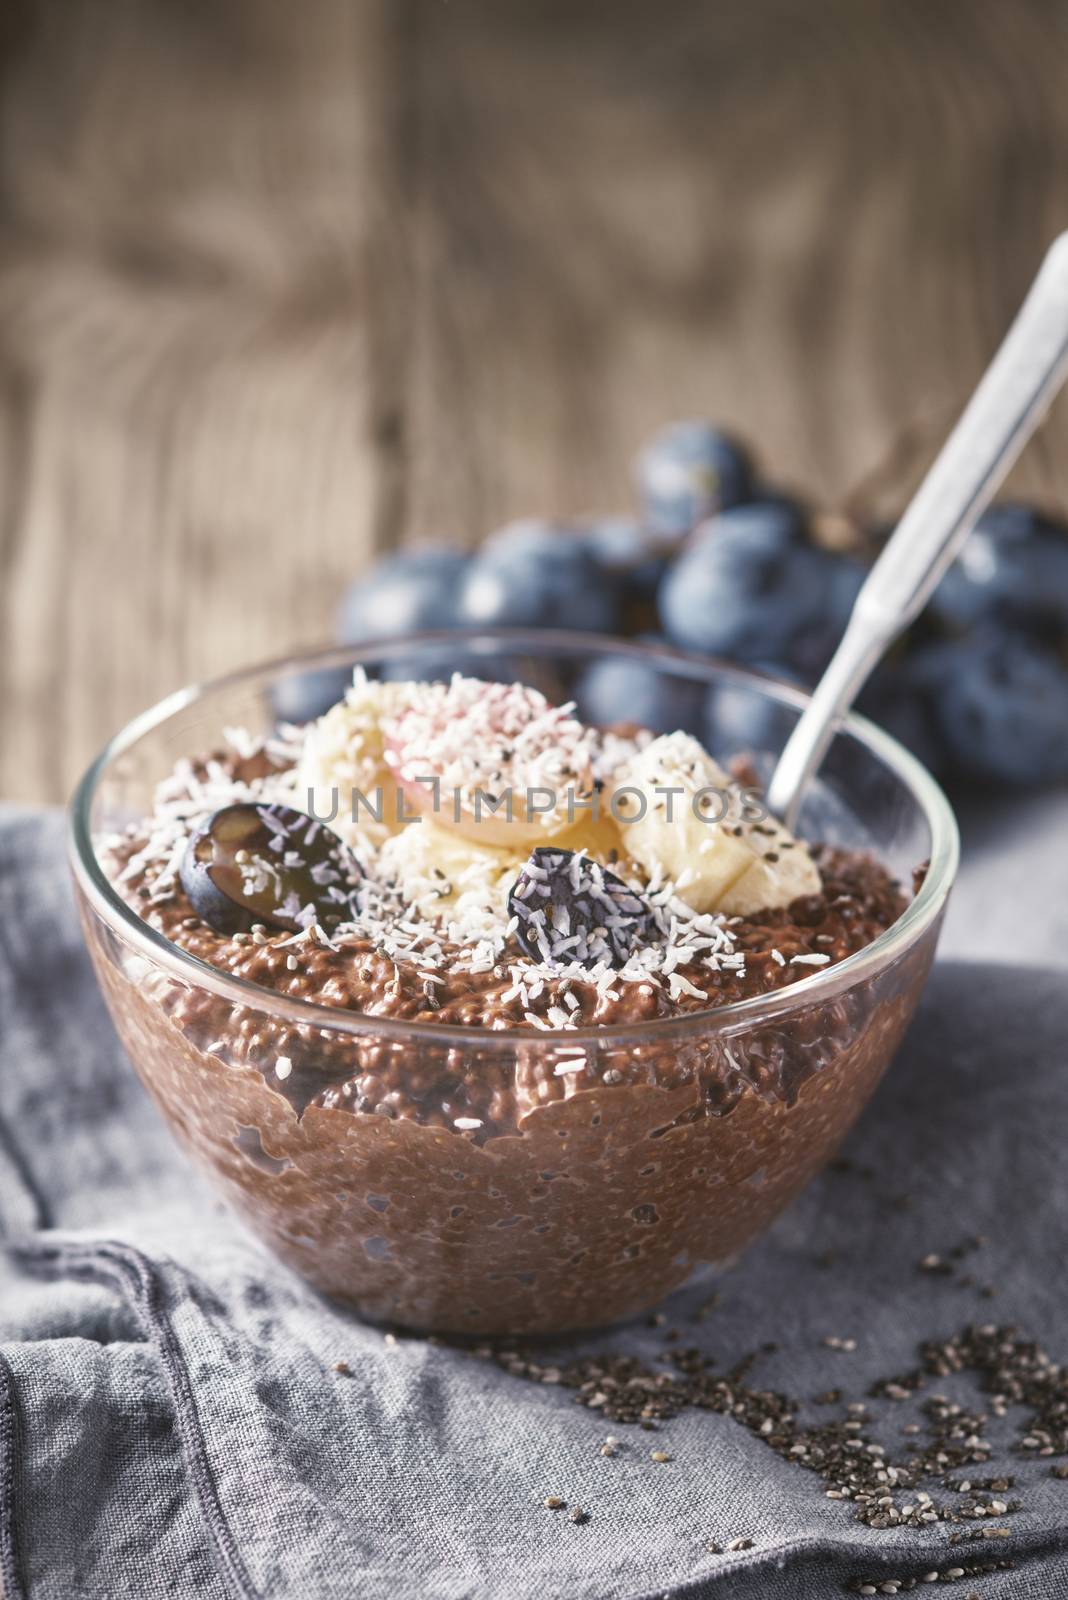 Chocolate chia pudding in the glass bowl vertical by Deniskarpenkov